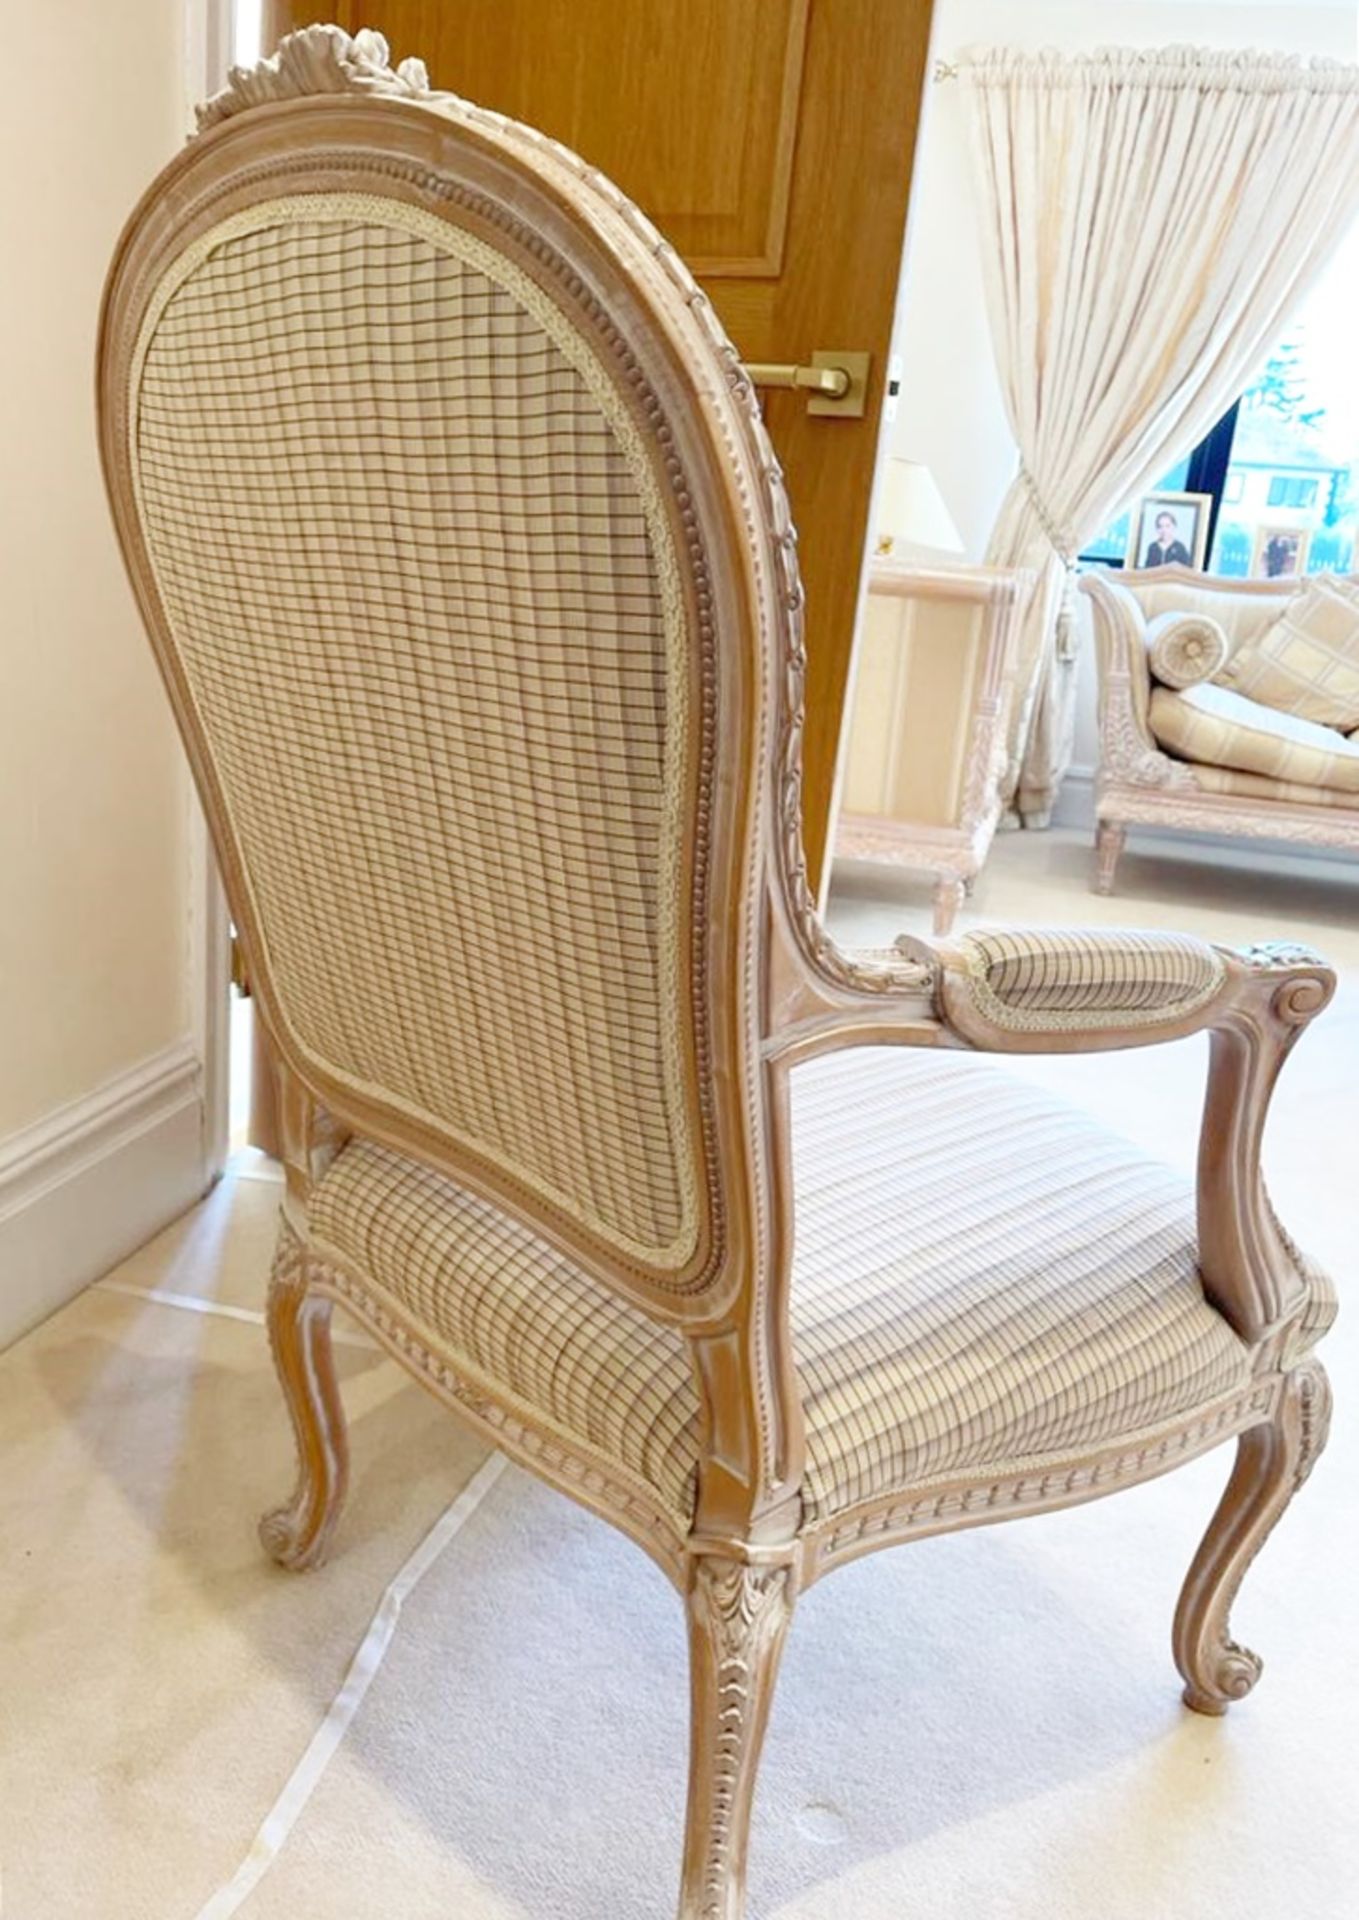 Pair of French Shabby Chic Bedroom Chairs - Stunning Carved Wood Chair Upholstered With Striped - Image 11 of 16